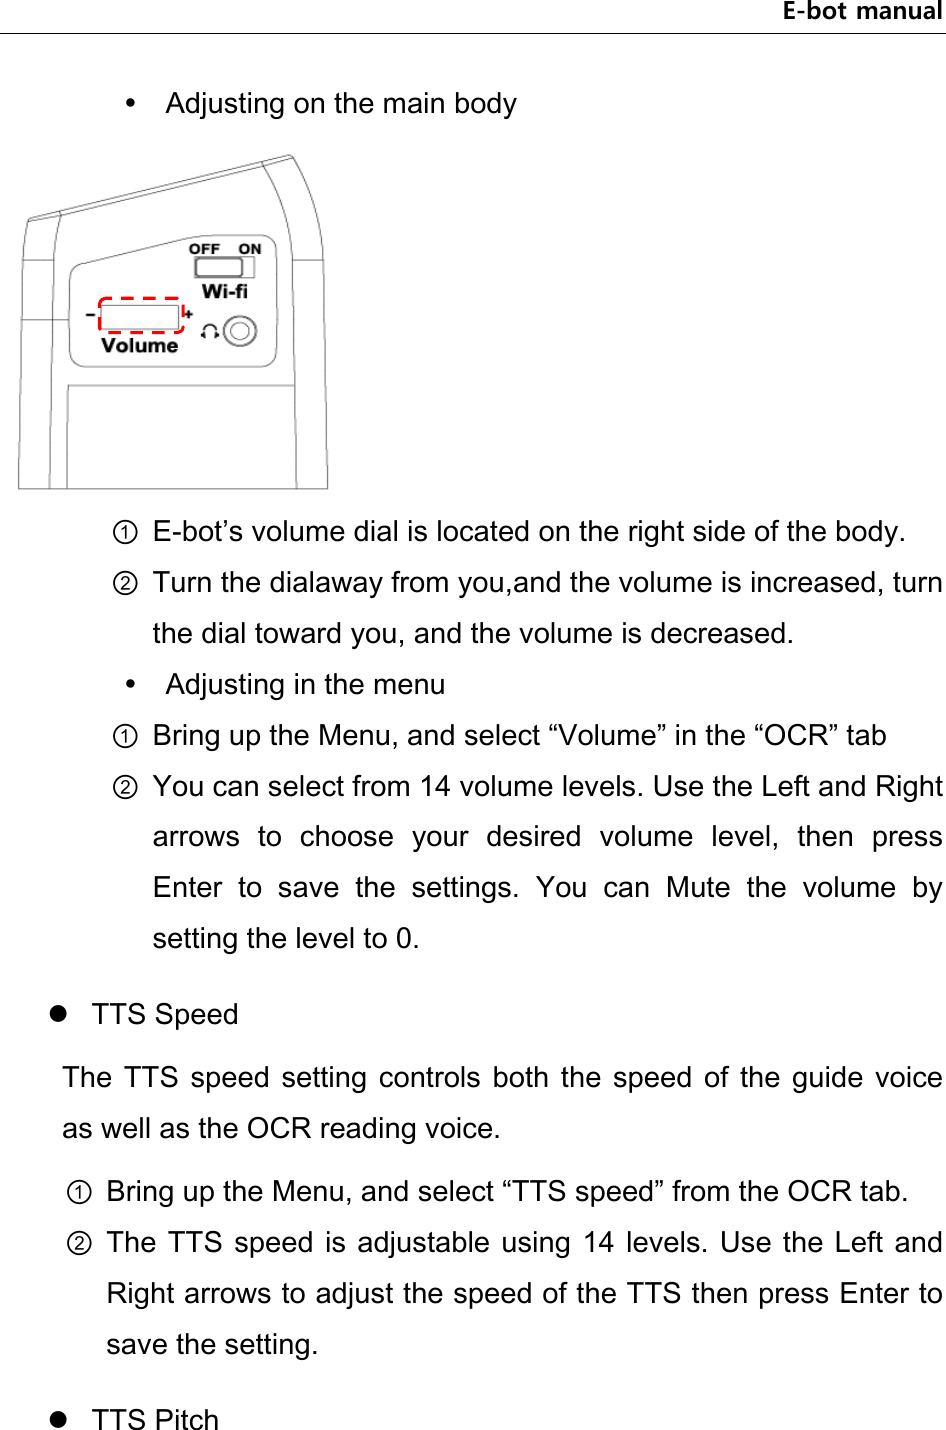 E-bot manual  Adjusting on the main body  ① E-bot’s volume dial is located on the right side of the body. ② Turn the dialaway from you,and the volume is increased, turn the dial toward you, and the volume is decreased.  Adjusting in the menu ① Bring up the Menu, and select “Volume” in the “OCR” tab ② You can select from 14 volume levels. Use the Left and Right arrows  to  choose  your  desired  volume  level,  then  press Enter  to  save  the  settings.  You  can  Mute  the  volume  by setting the level to 0.  TTS Speed The  TTS  speed  setting  controls  both  the  speed of  the  guide  voice as well as the OCR reading voice. ① Bring up the Menu, and select “TTS speed” from the OCR tab. ② The TTS  speed is adjustable using 14 levels. Use the Left and Right arrows to adjust the speed of the TTS then press Enter to save the setting.  TTS Pitch 